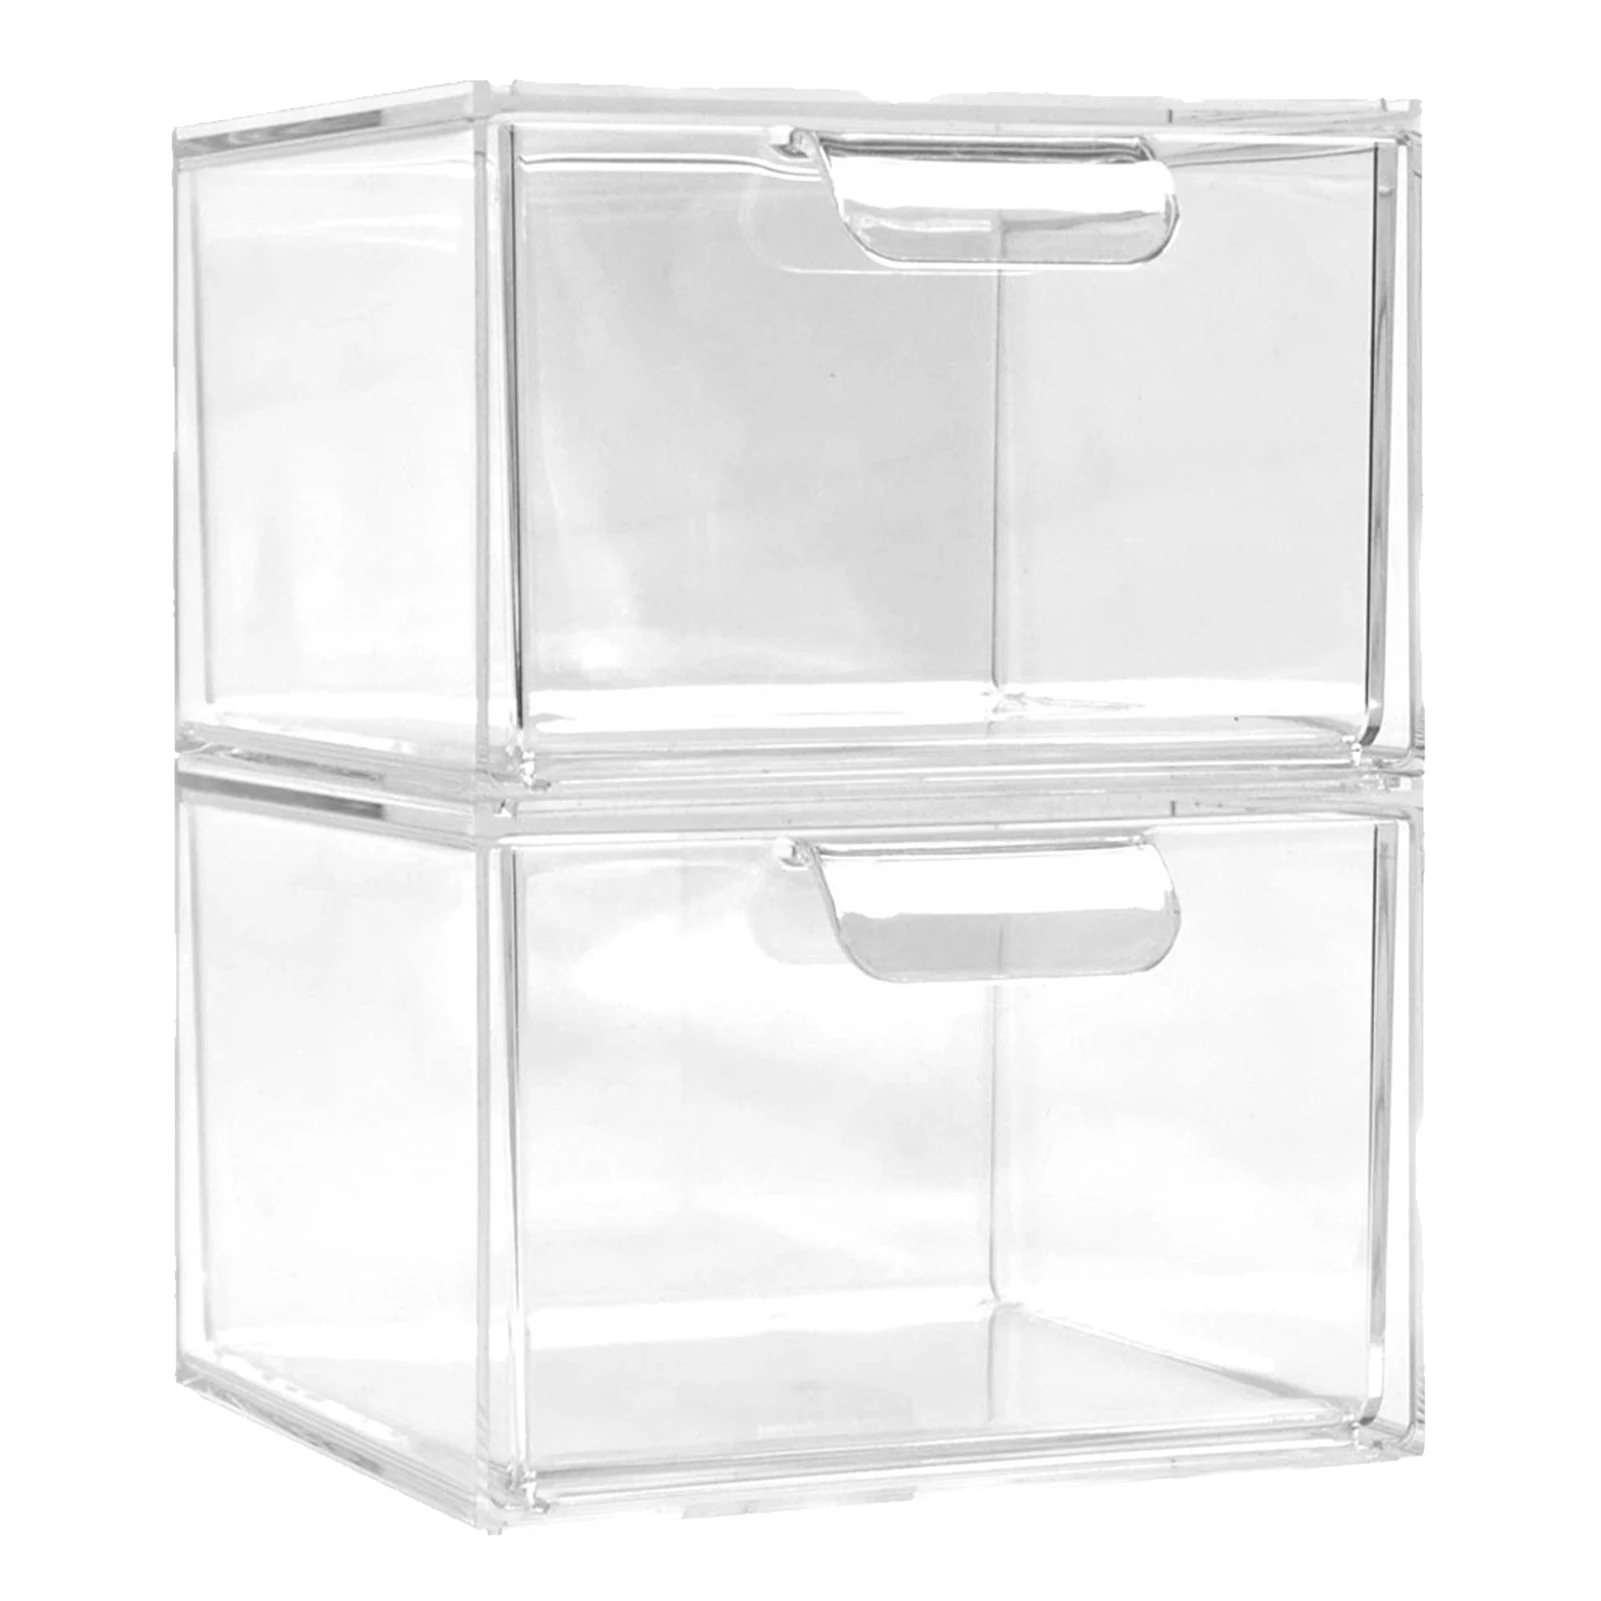 

Stable Clear Plastic Safe Household Smooth With Drawers Space Saving Multifunctional Convenient Stackable Makeup Organizer